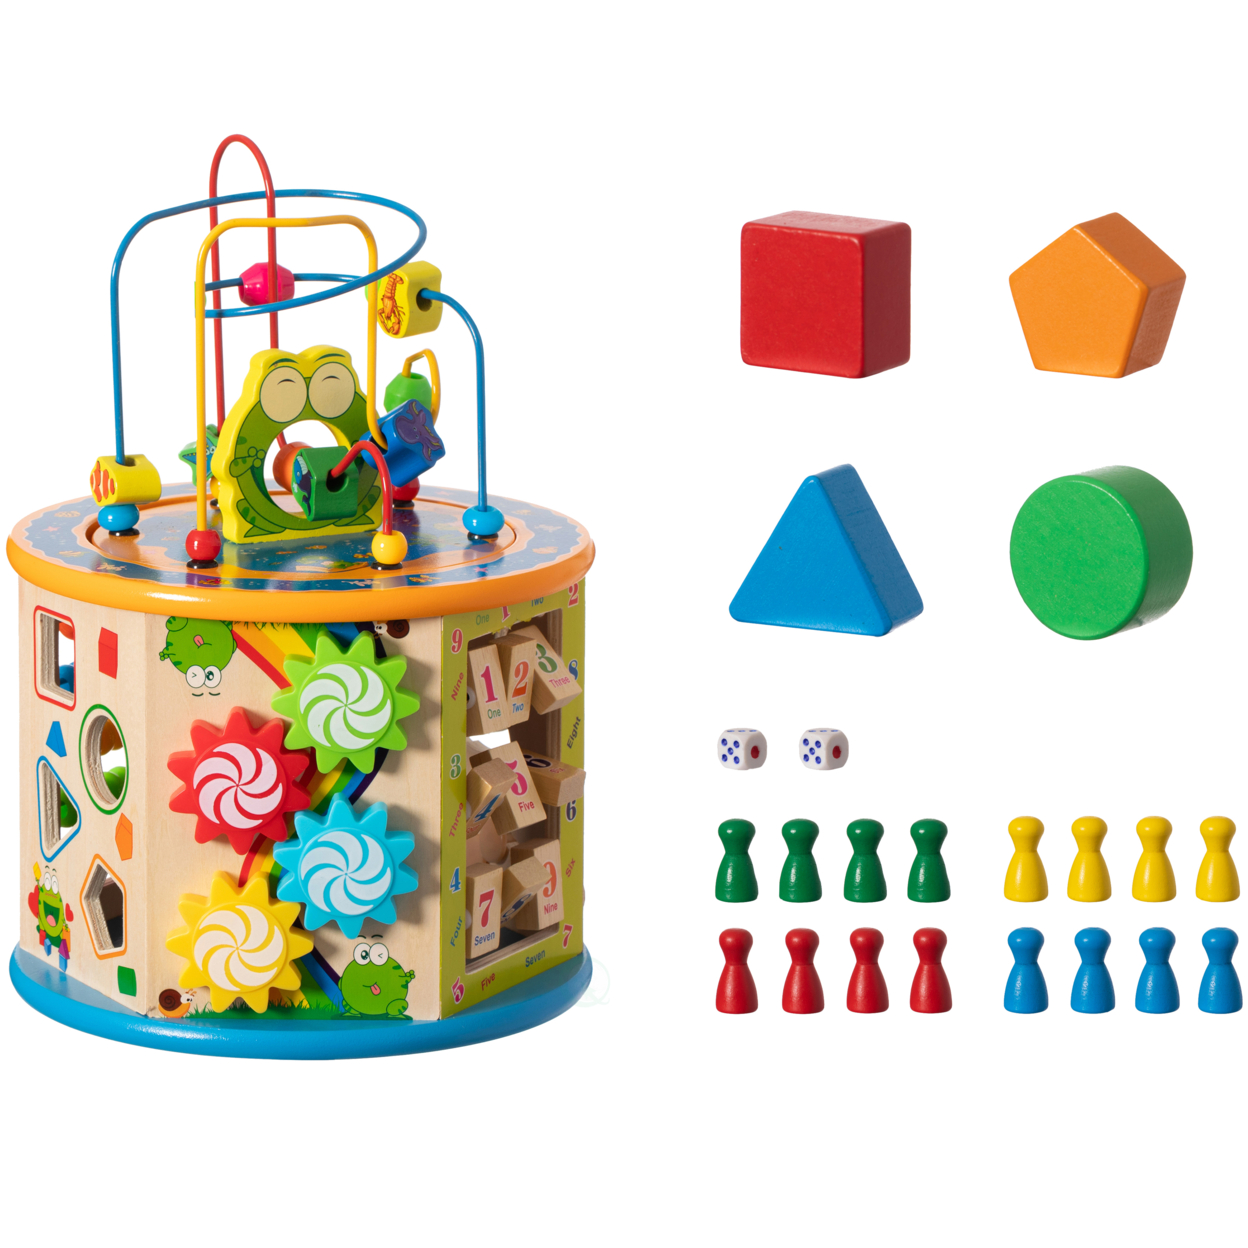 8 In 1 Colorful Attractive Wooden Kids Baby Activity Play Cube, Fun Toy Center For Playroom, Nursery, Preschool, And Doctors' Office